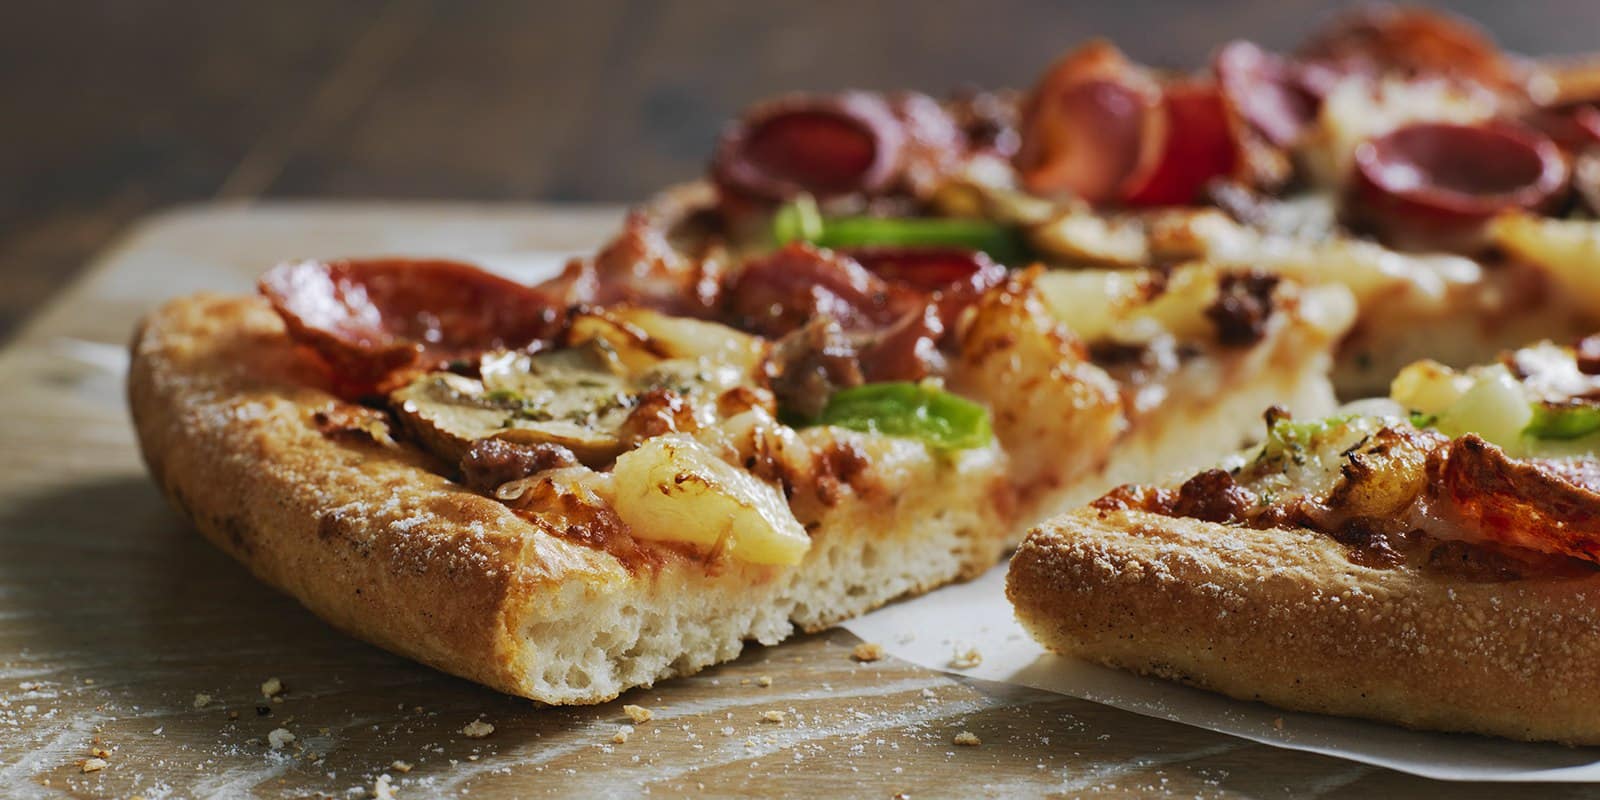 Differences Between the Five Domino's Pizza Crusts